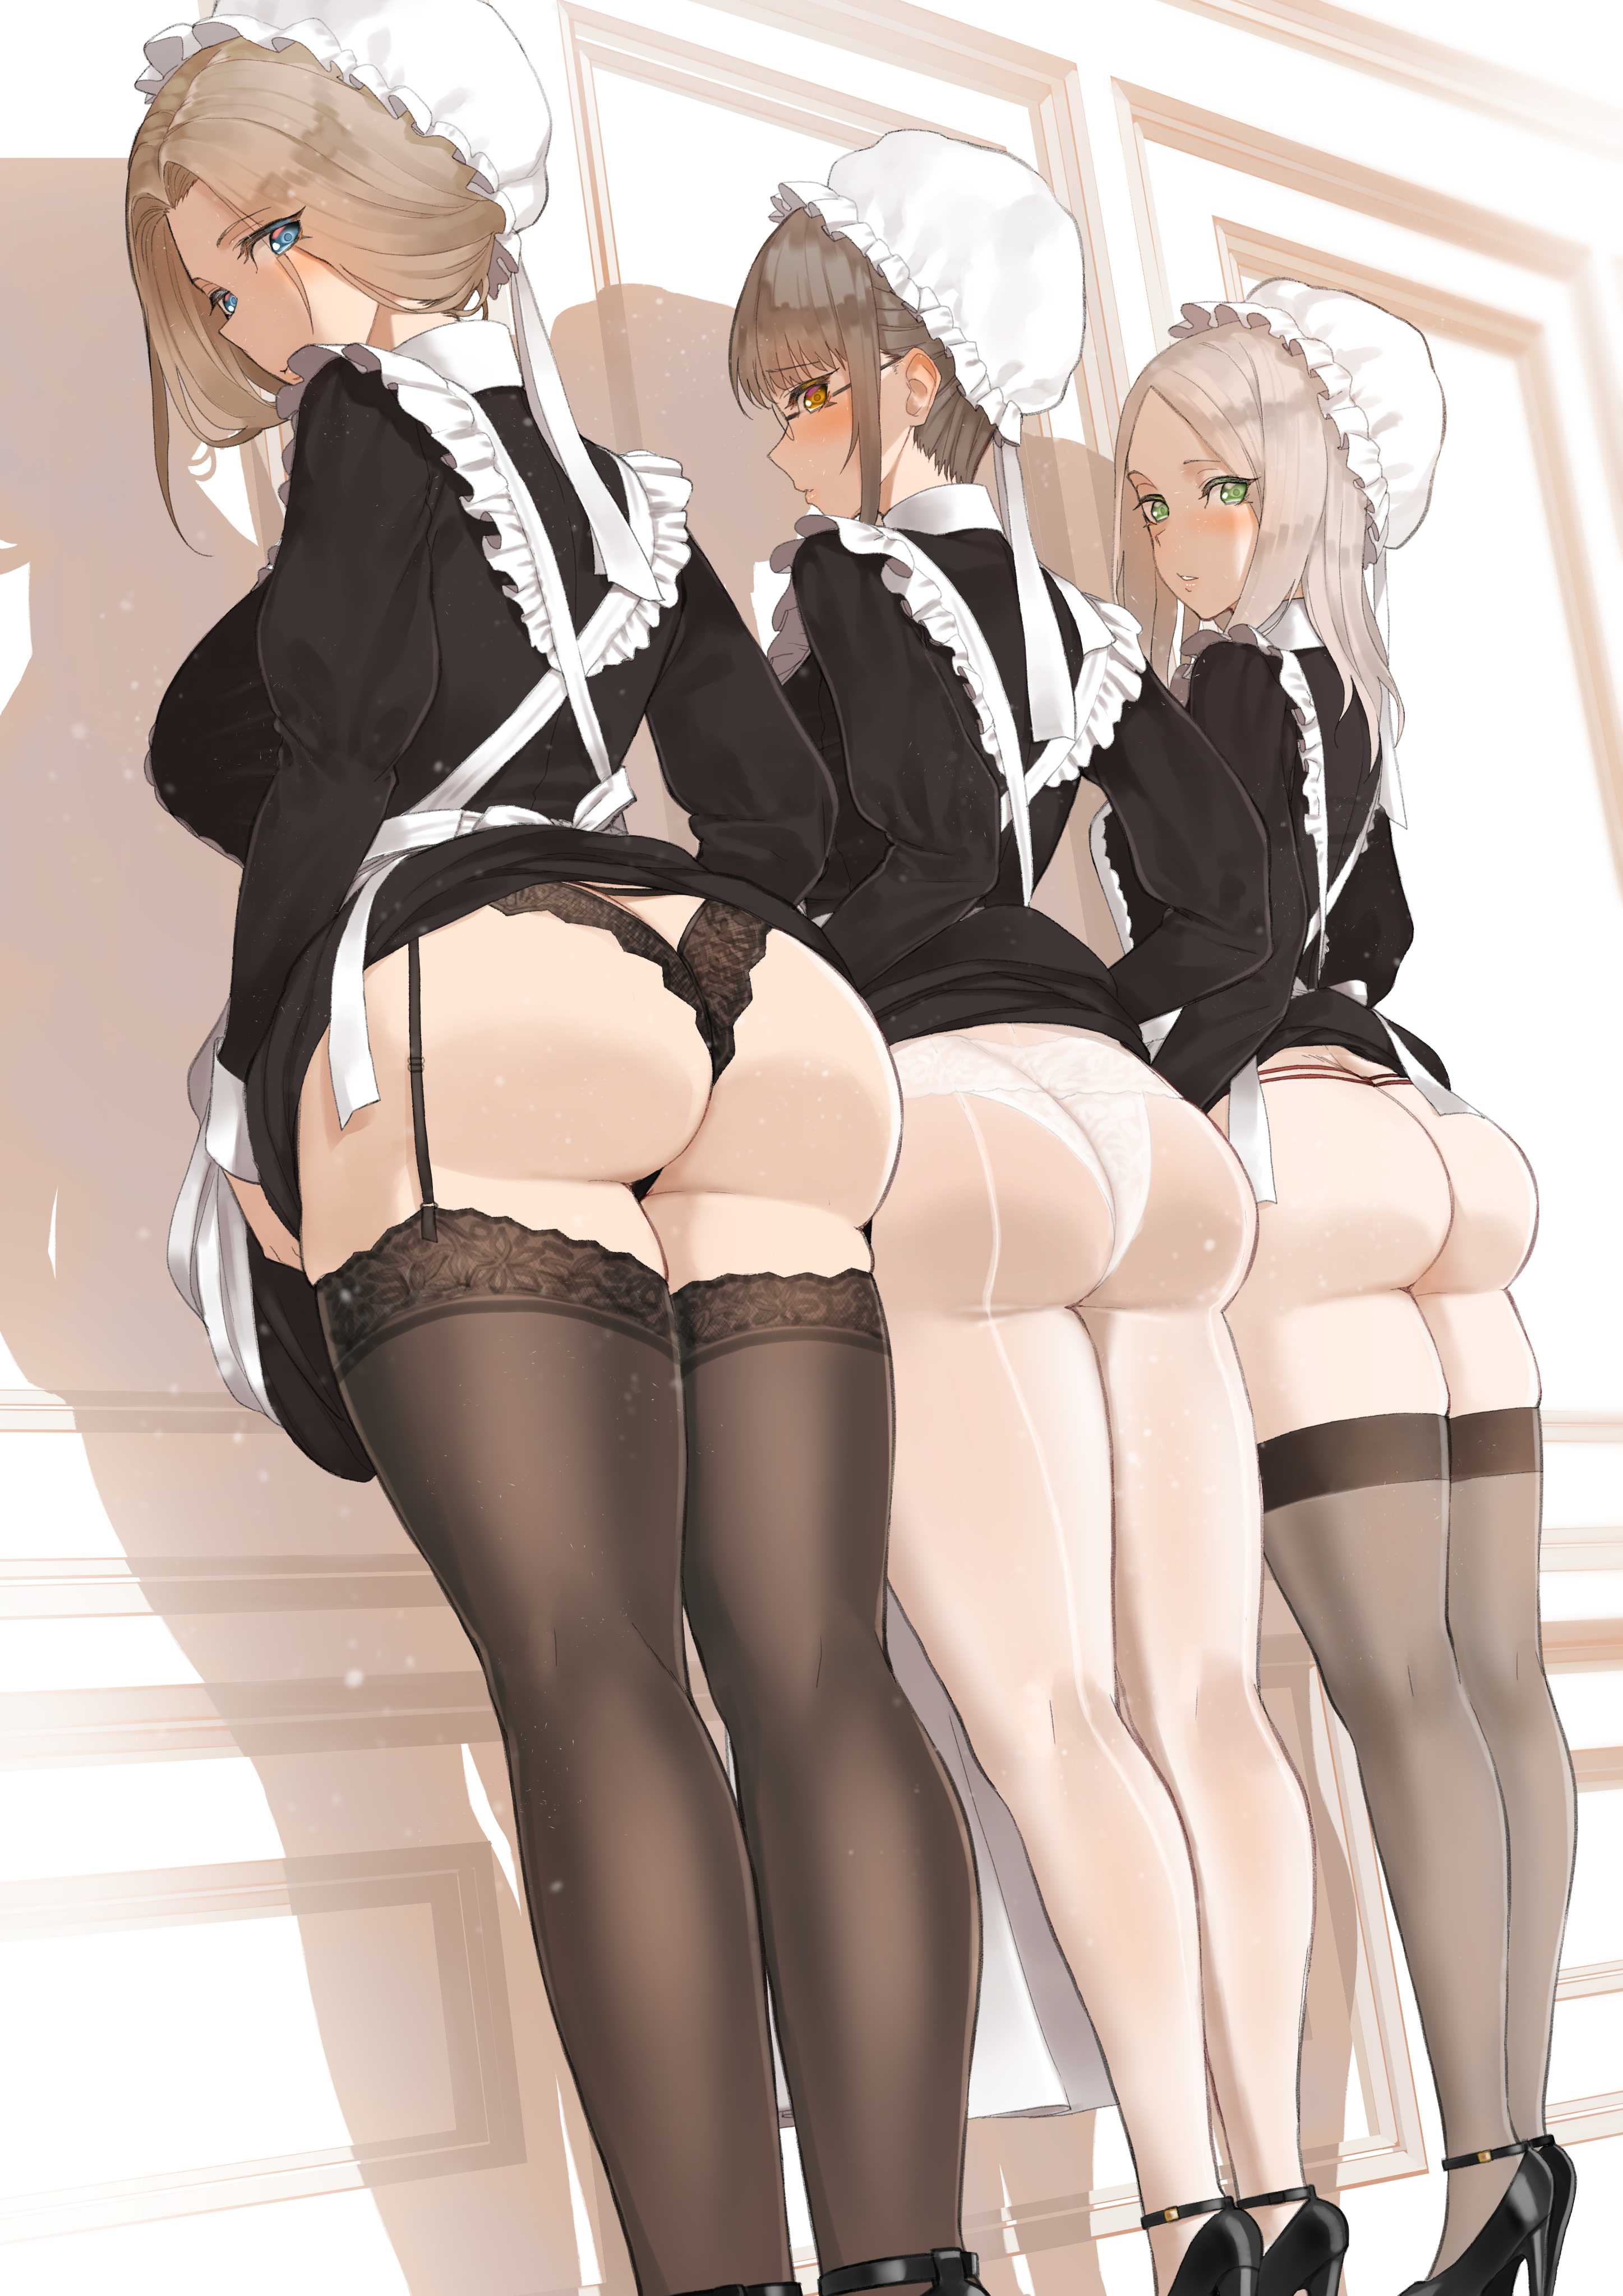 Anime 2894x4093 anime anime girls Throtem portrait display ass maid maid outfit stockings garter belt glasses heels group of asses line-up group of women looking back women trio